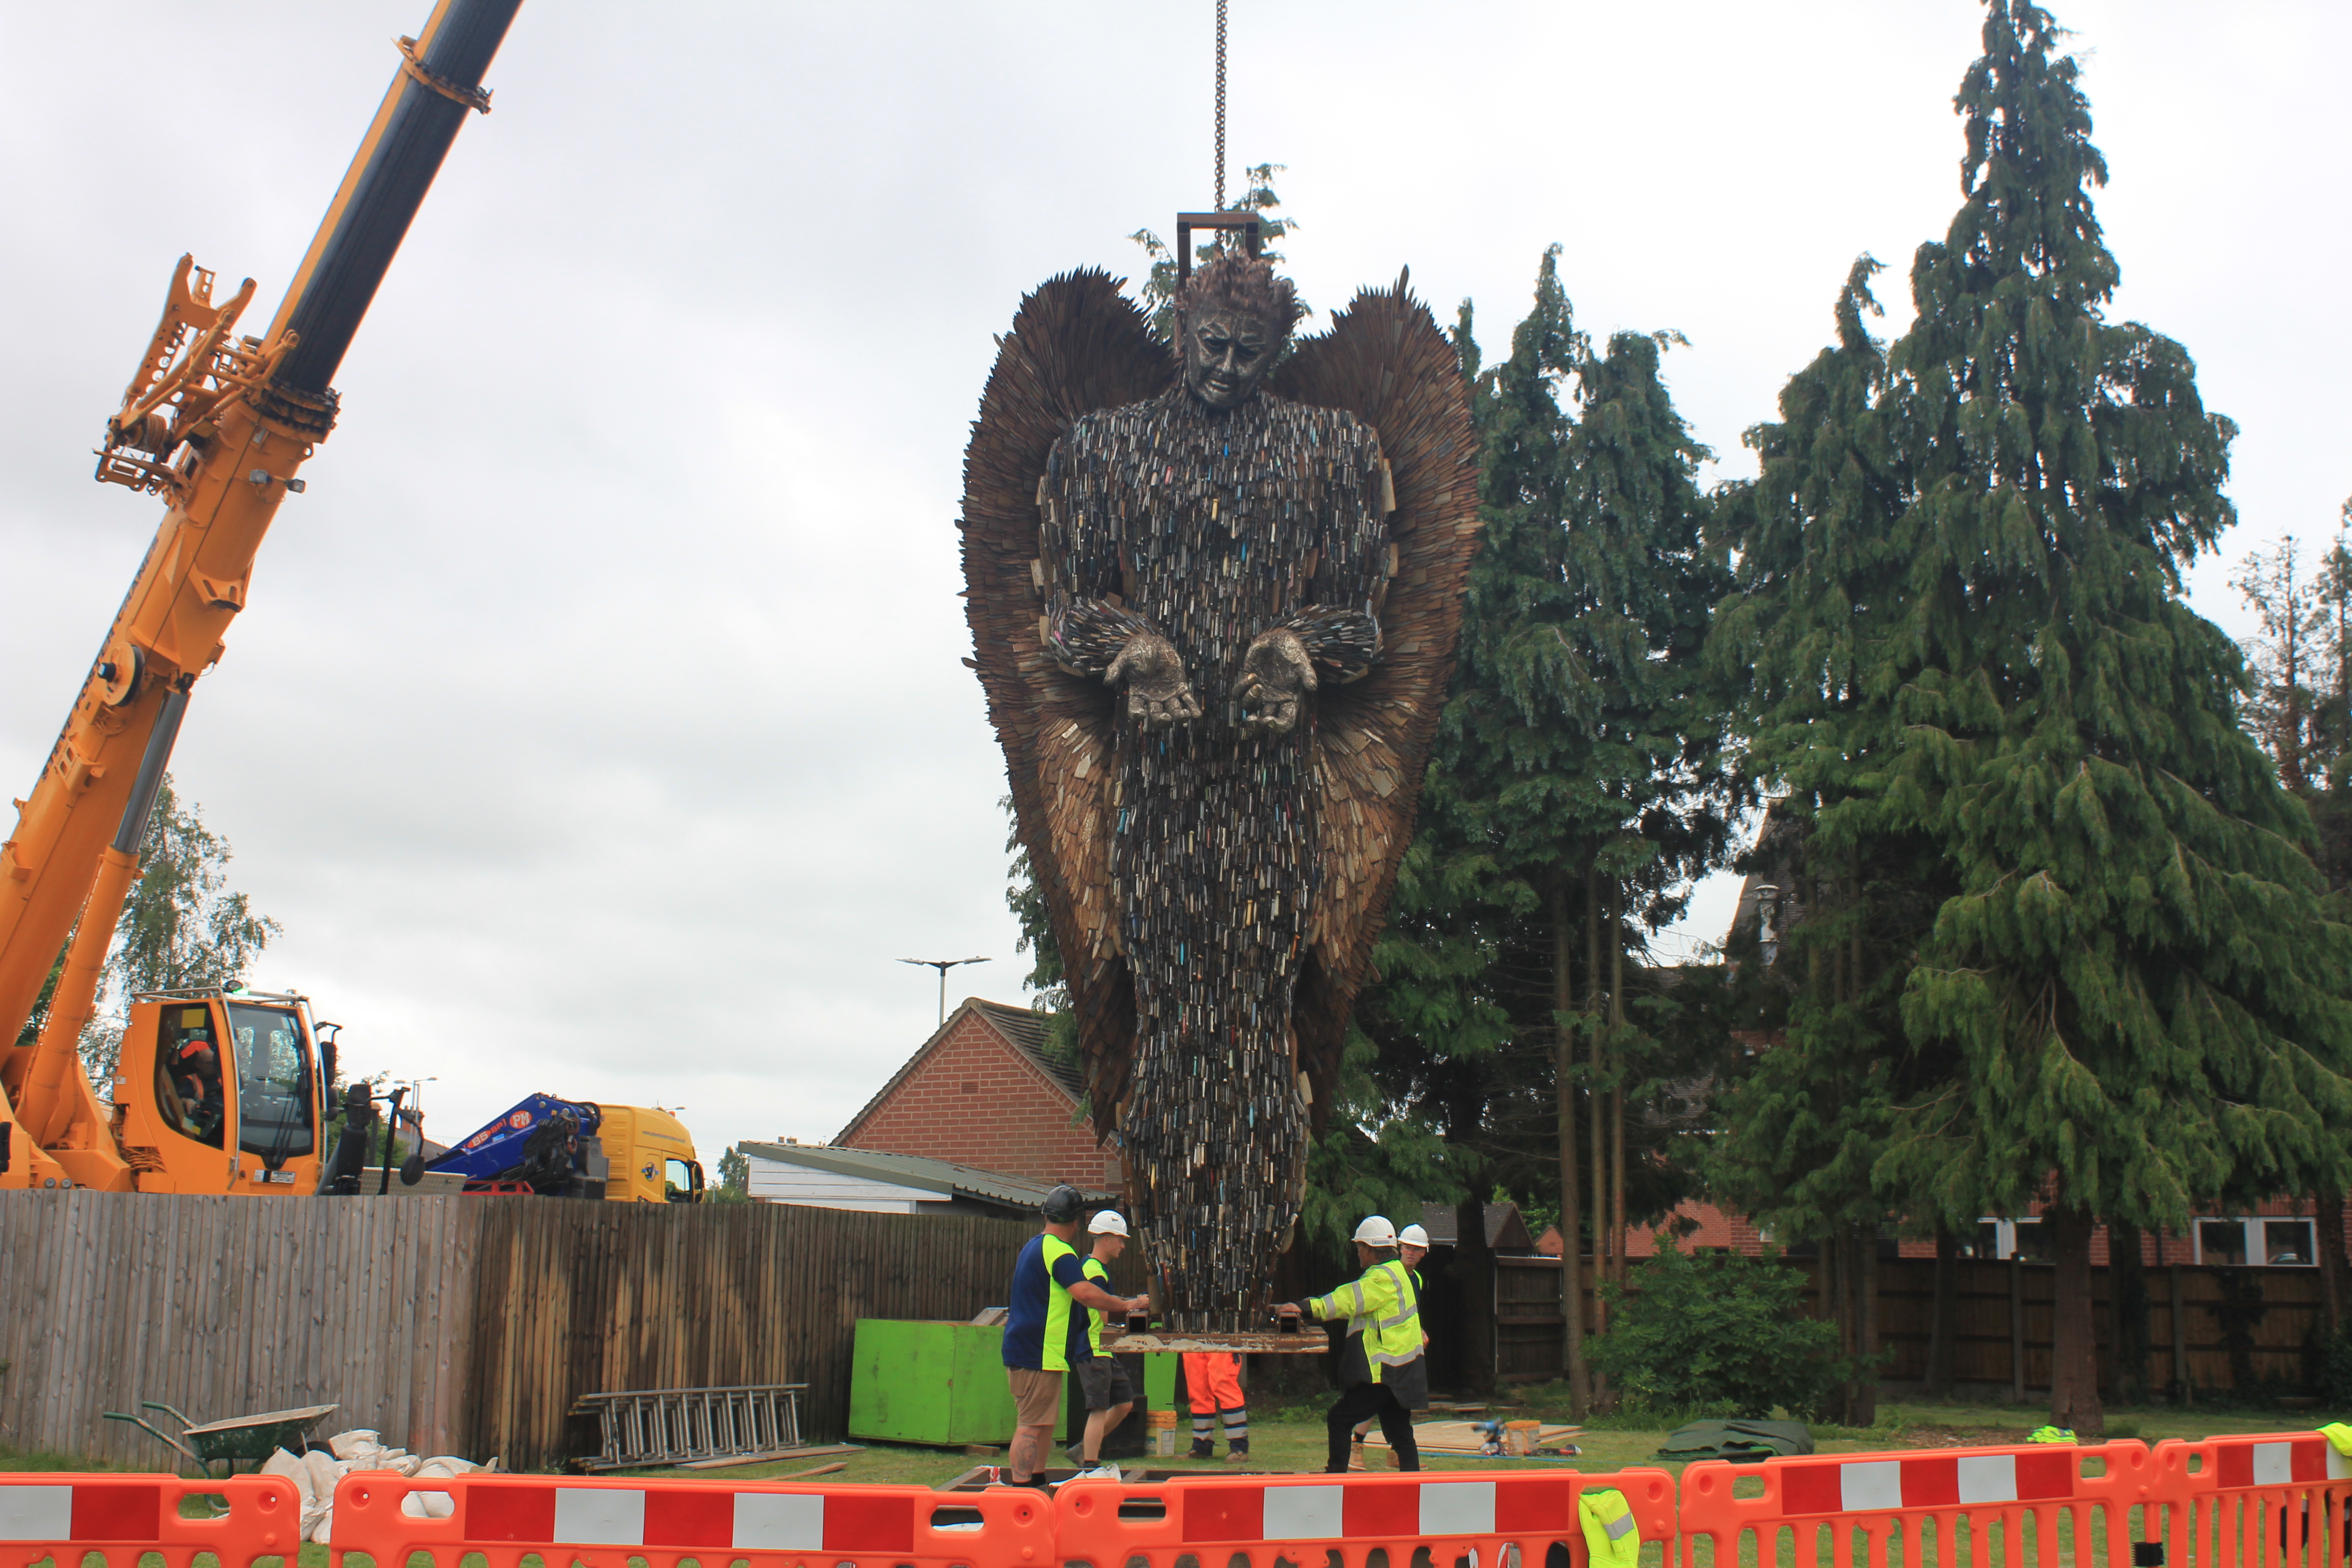 The Knife Angel has arrived in Lichfield city centre.